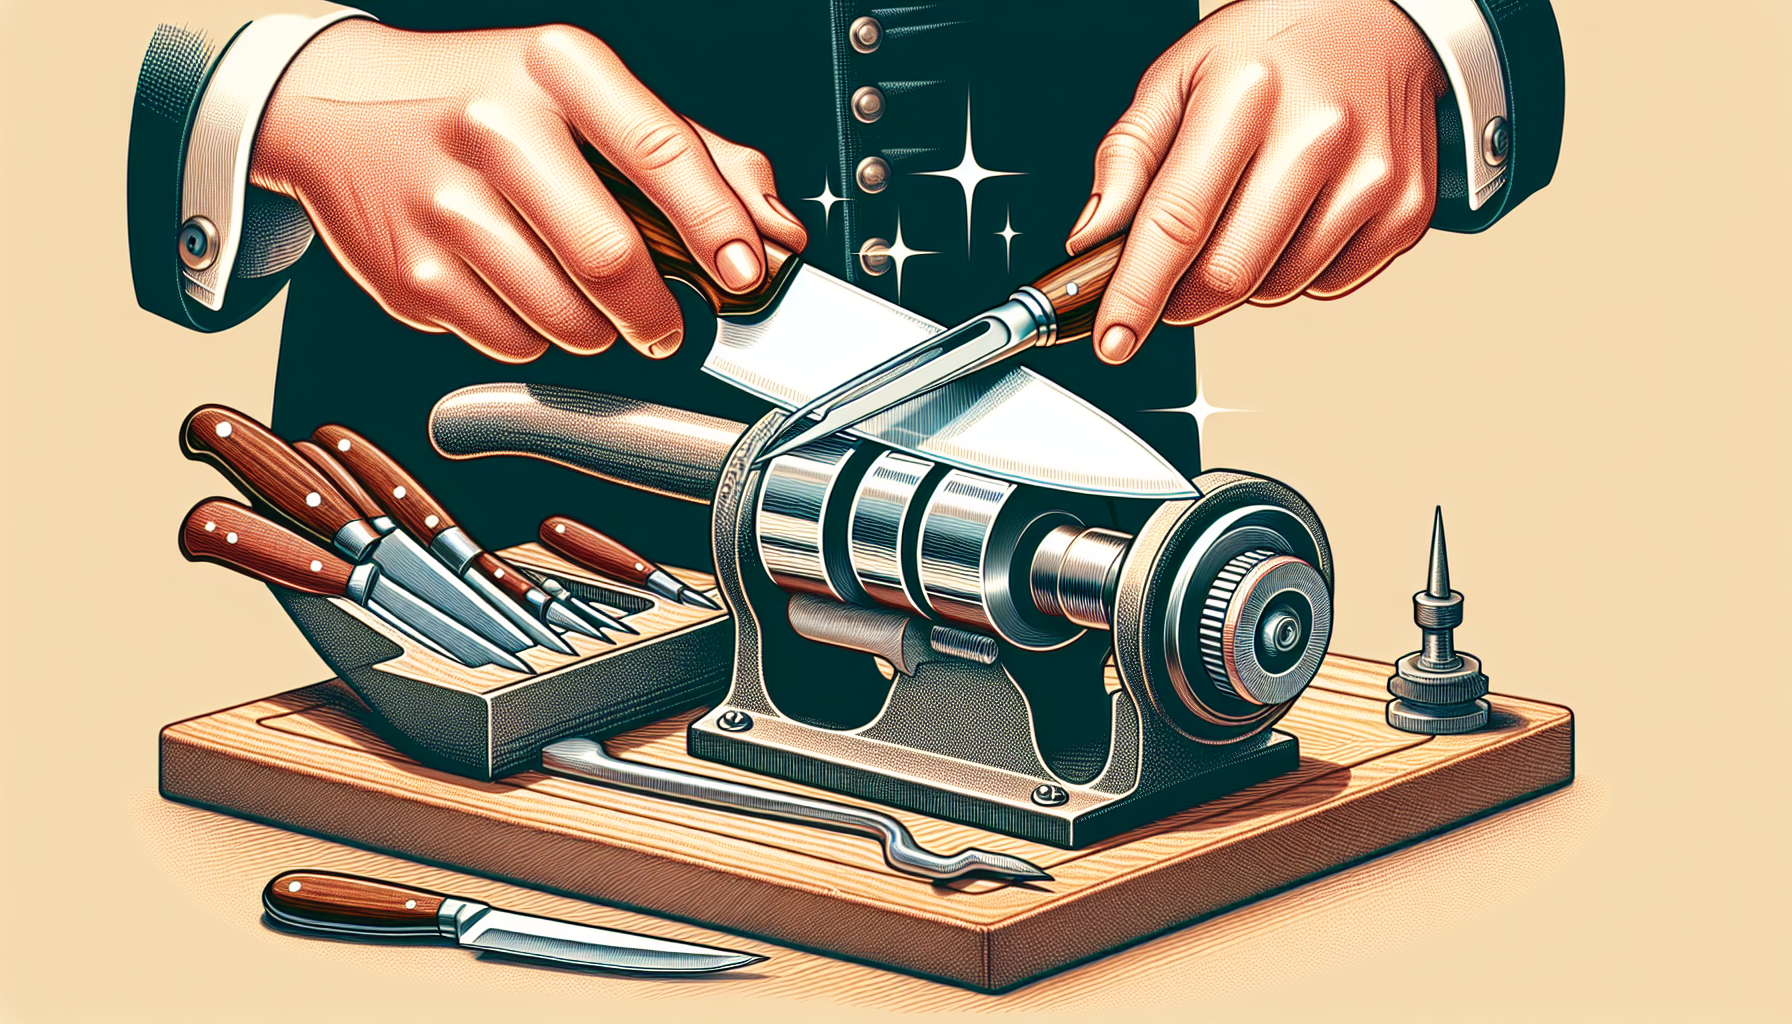 Are Expensive Knife Sharpeners Worth It?